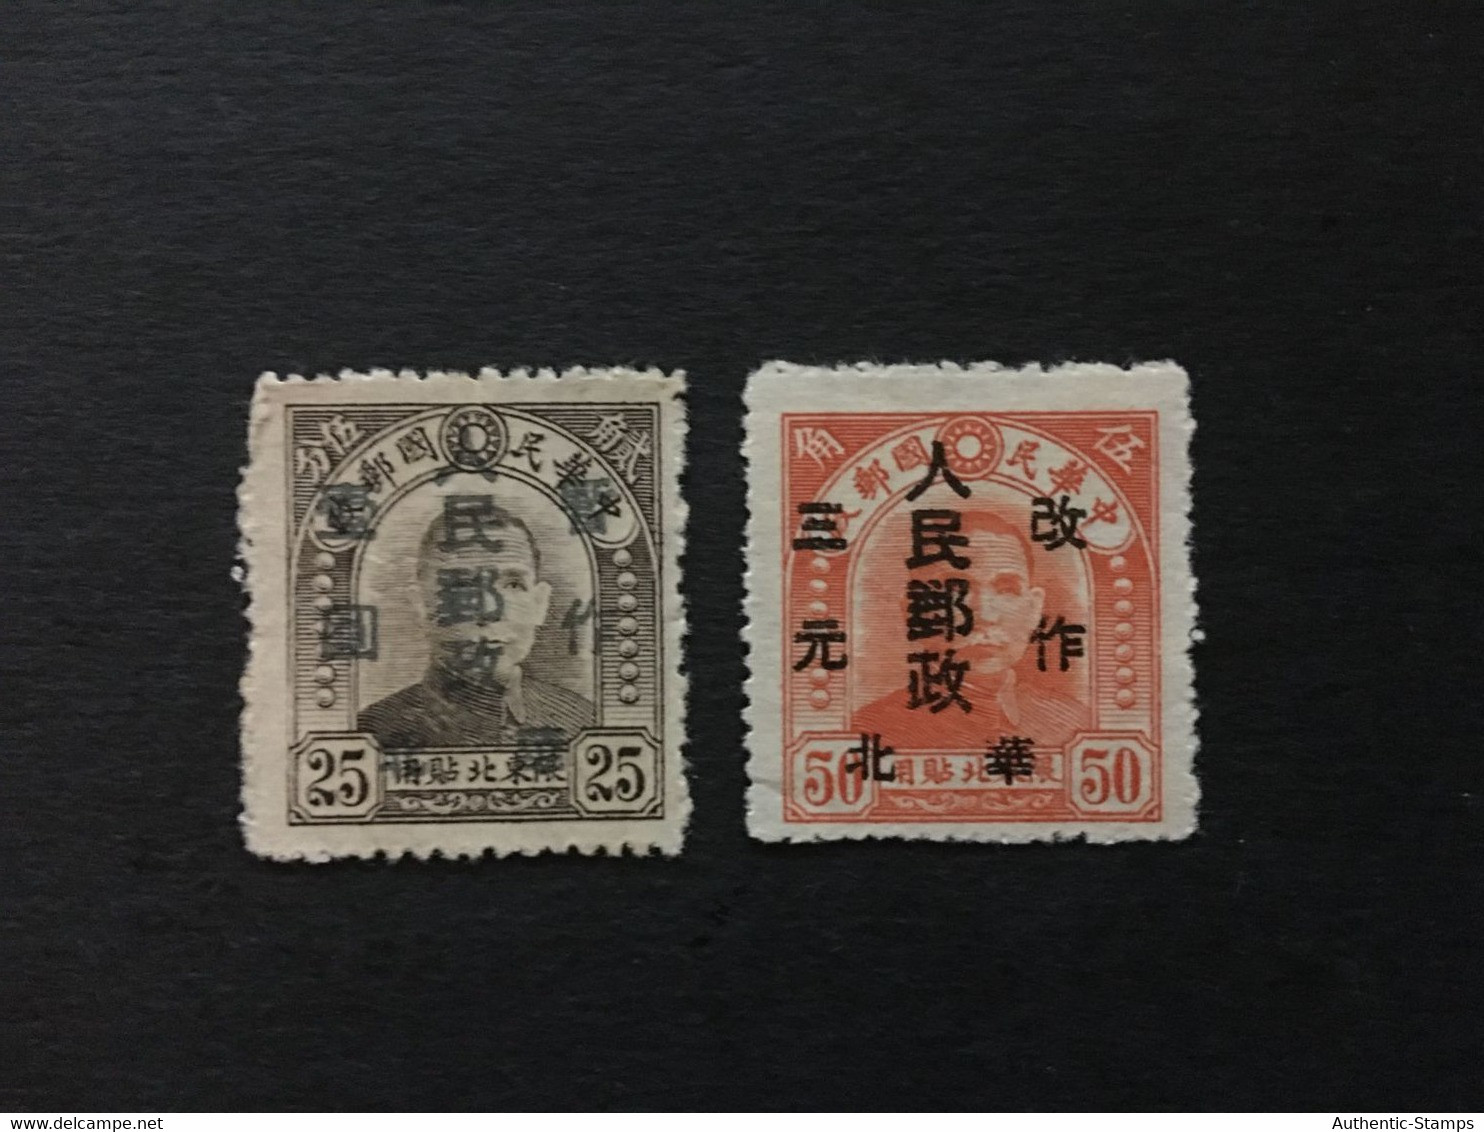 China Stamp Set, Overprint, Liberated Area, CINA,CHINE,LIST1362 - Cina Del Nord 1949-50